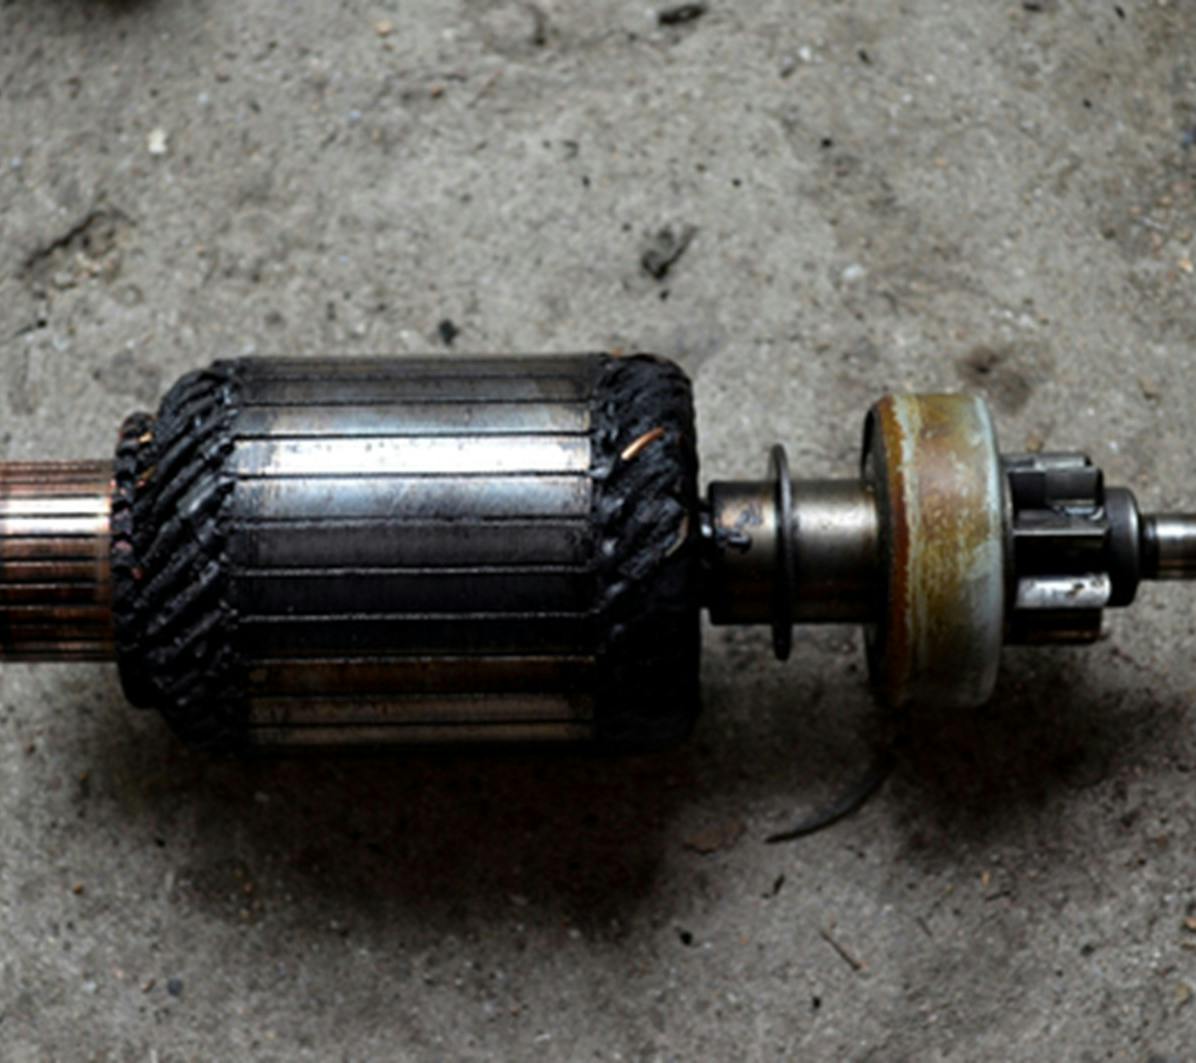 The armature found inside a starter motor laying on the ground